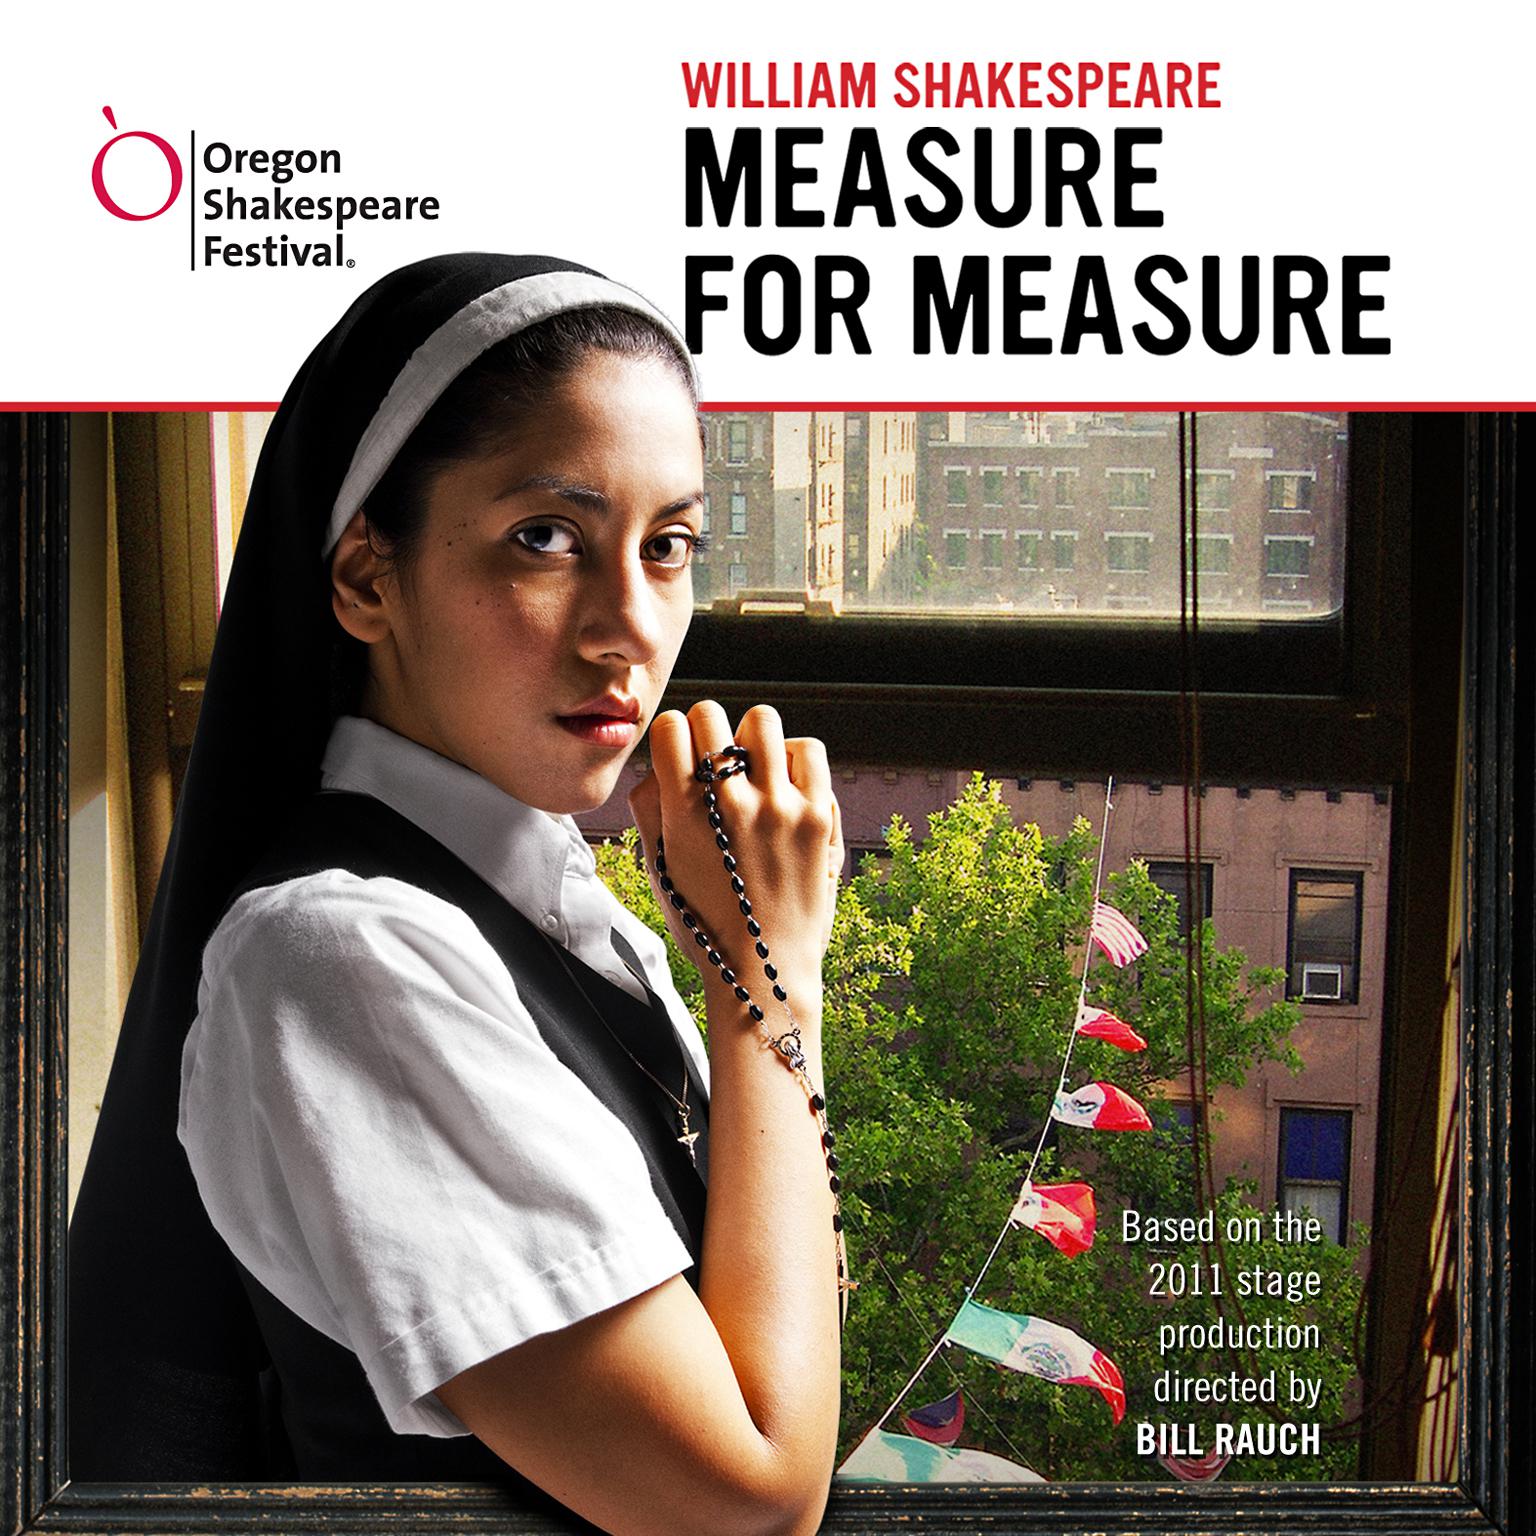 Measure for Measure Audiobook, by William Shakespeare